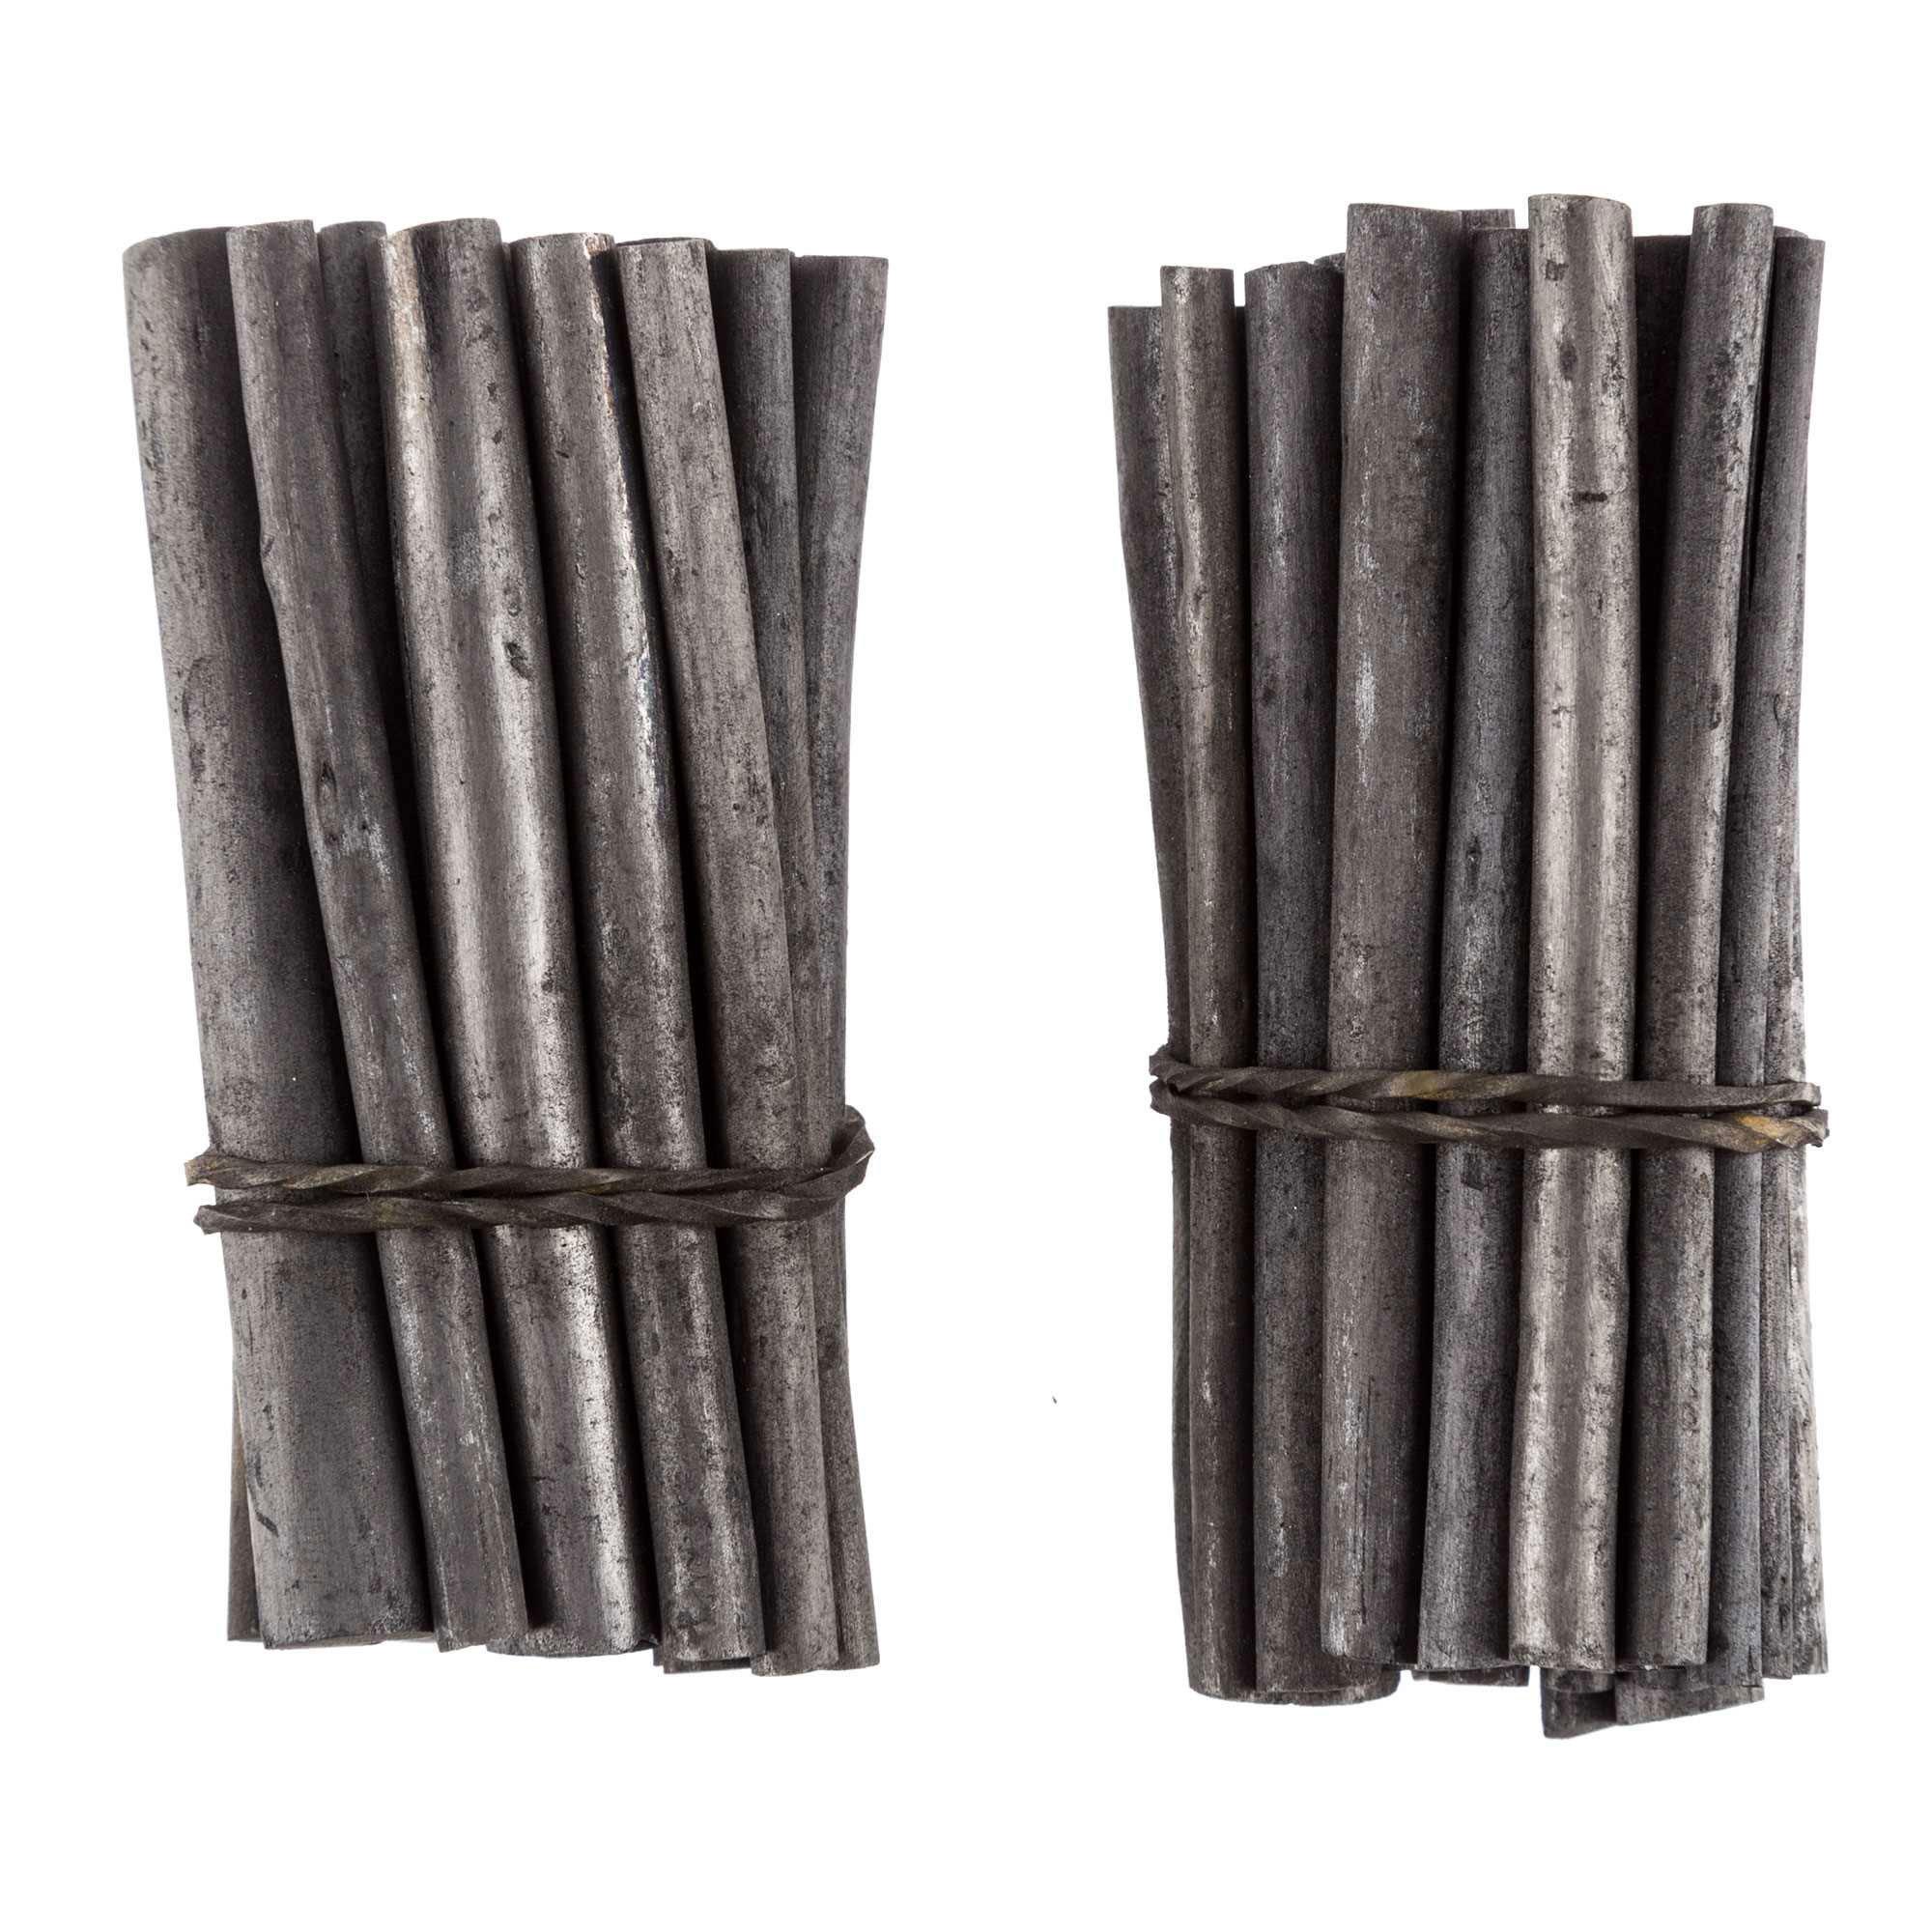 Holbein Willow Charcoal- Box of 25 Soft Sticks